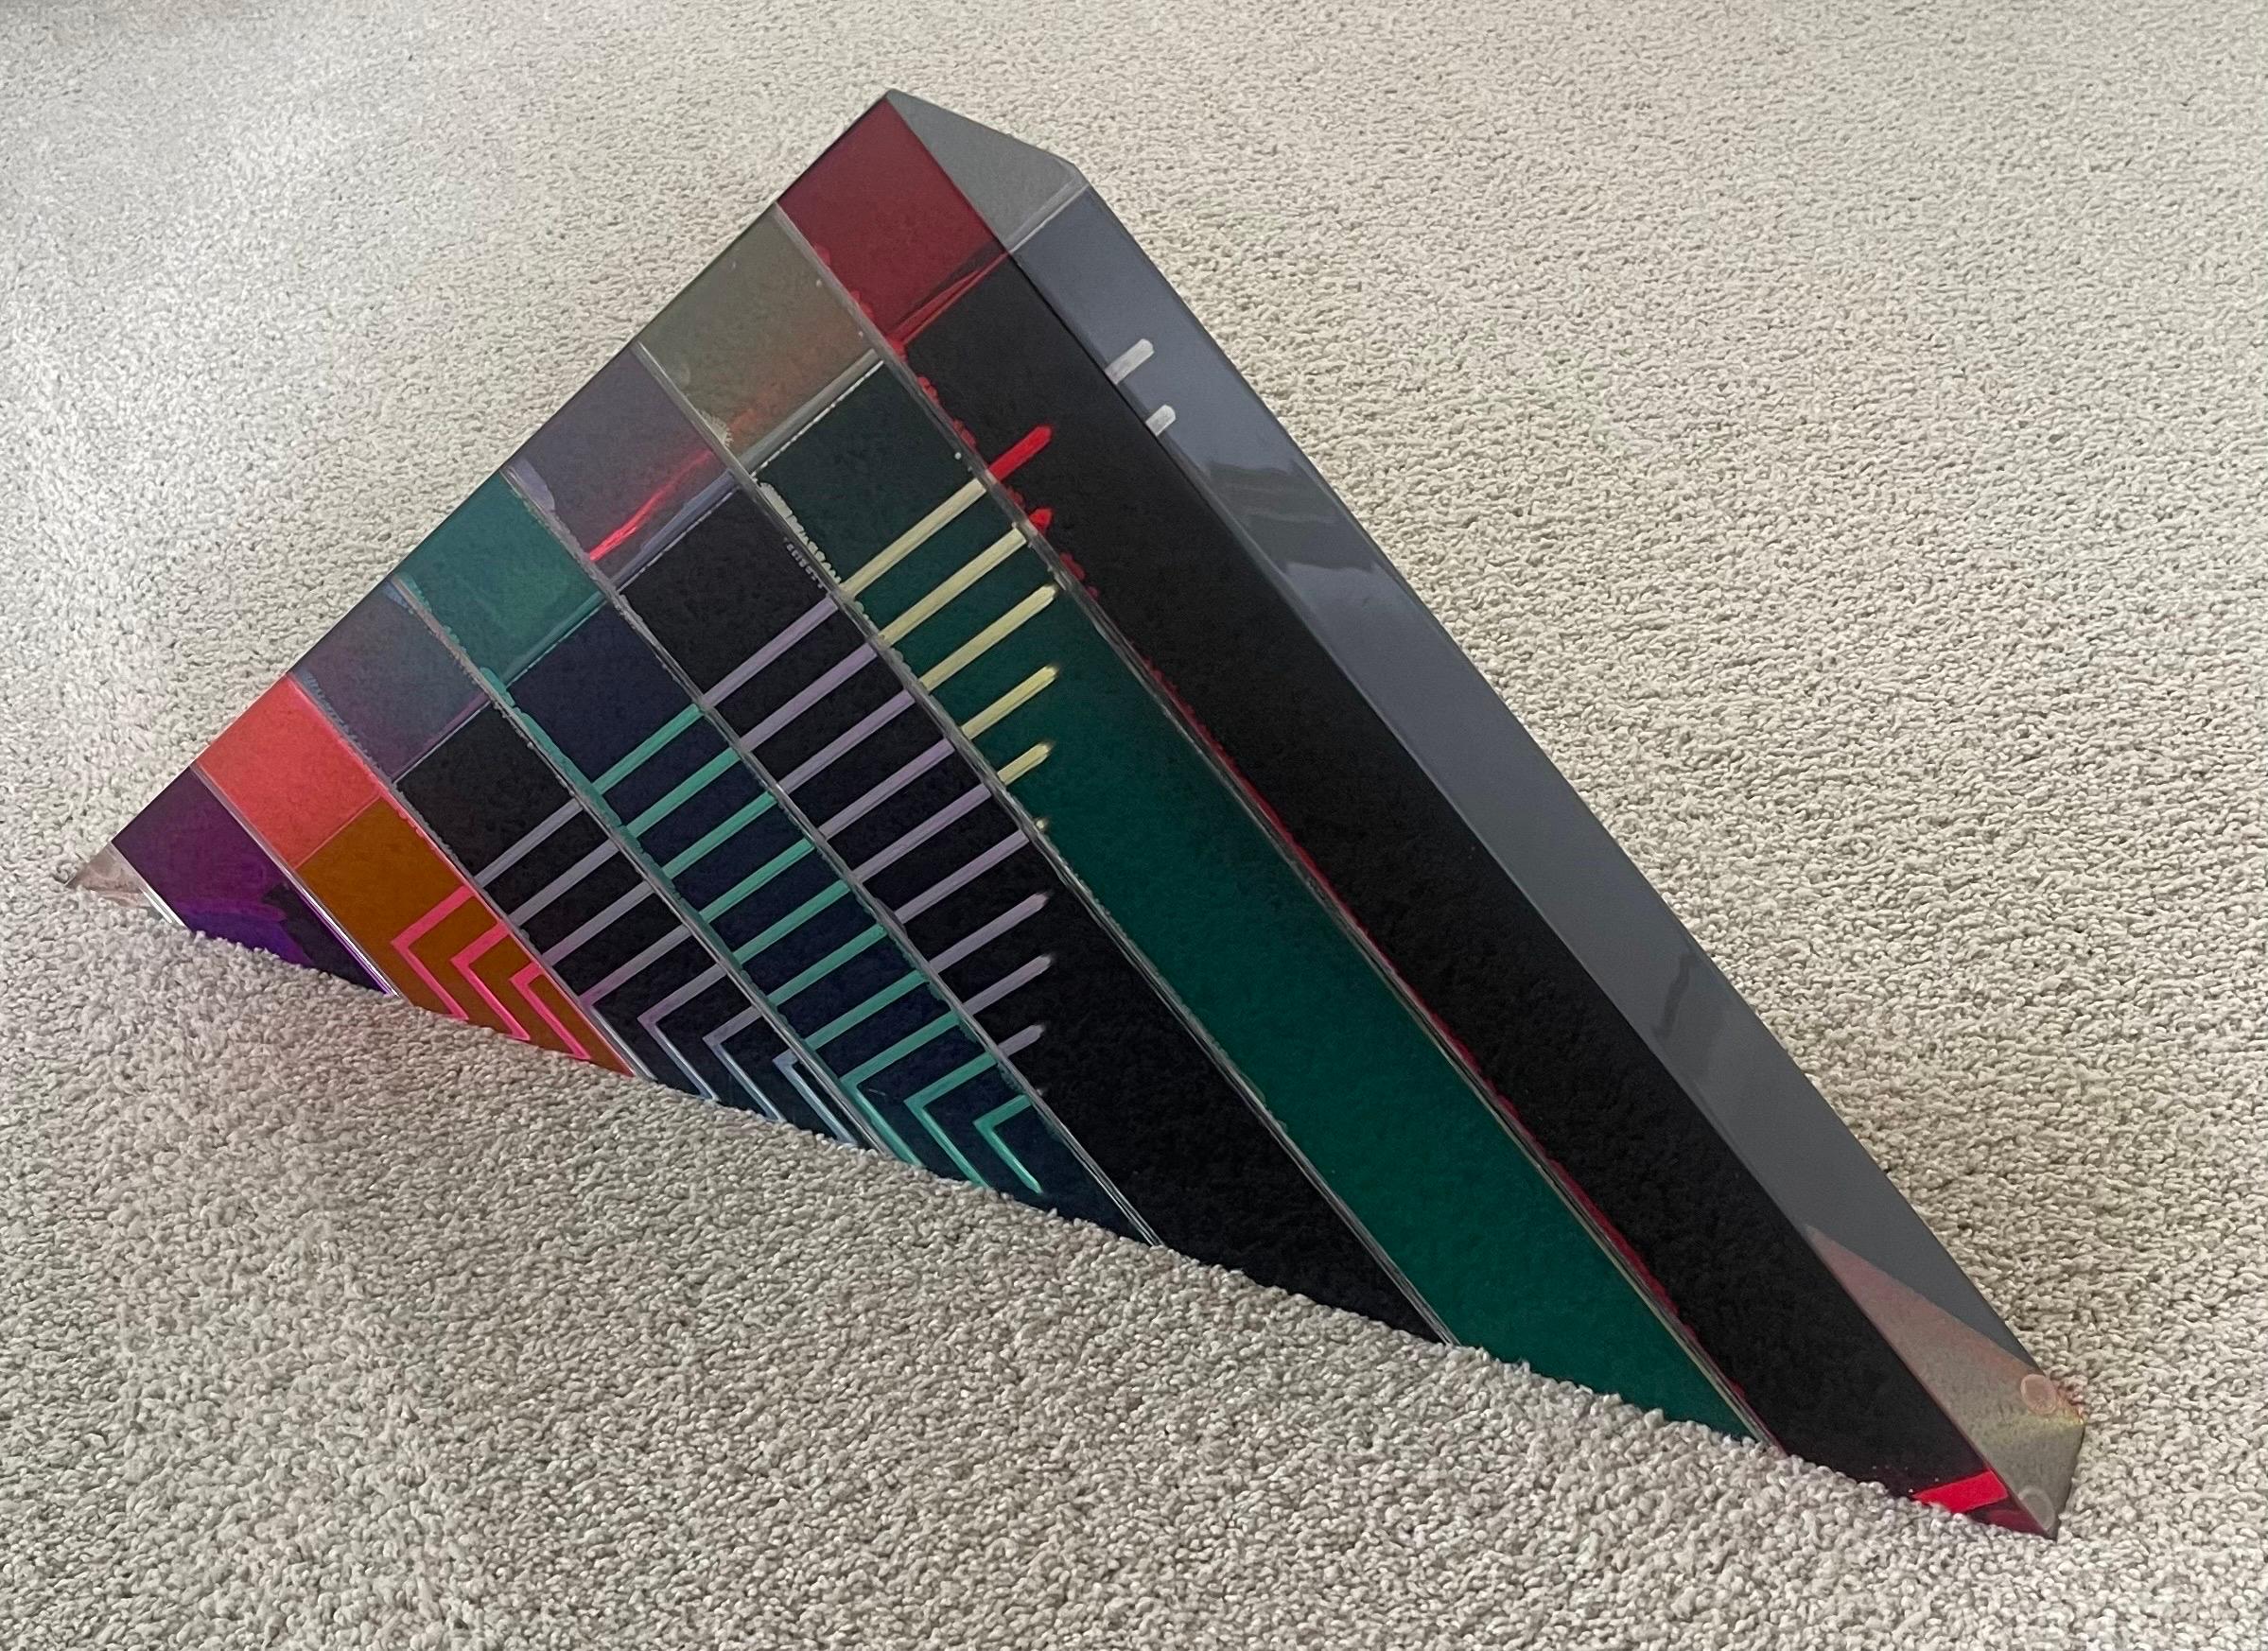 Large Colorful Triangular Lucite Sculpture by Shlomi Haziza For Sale 4